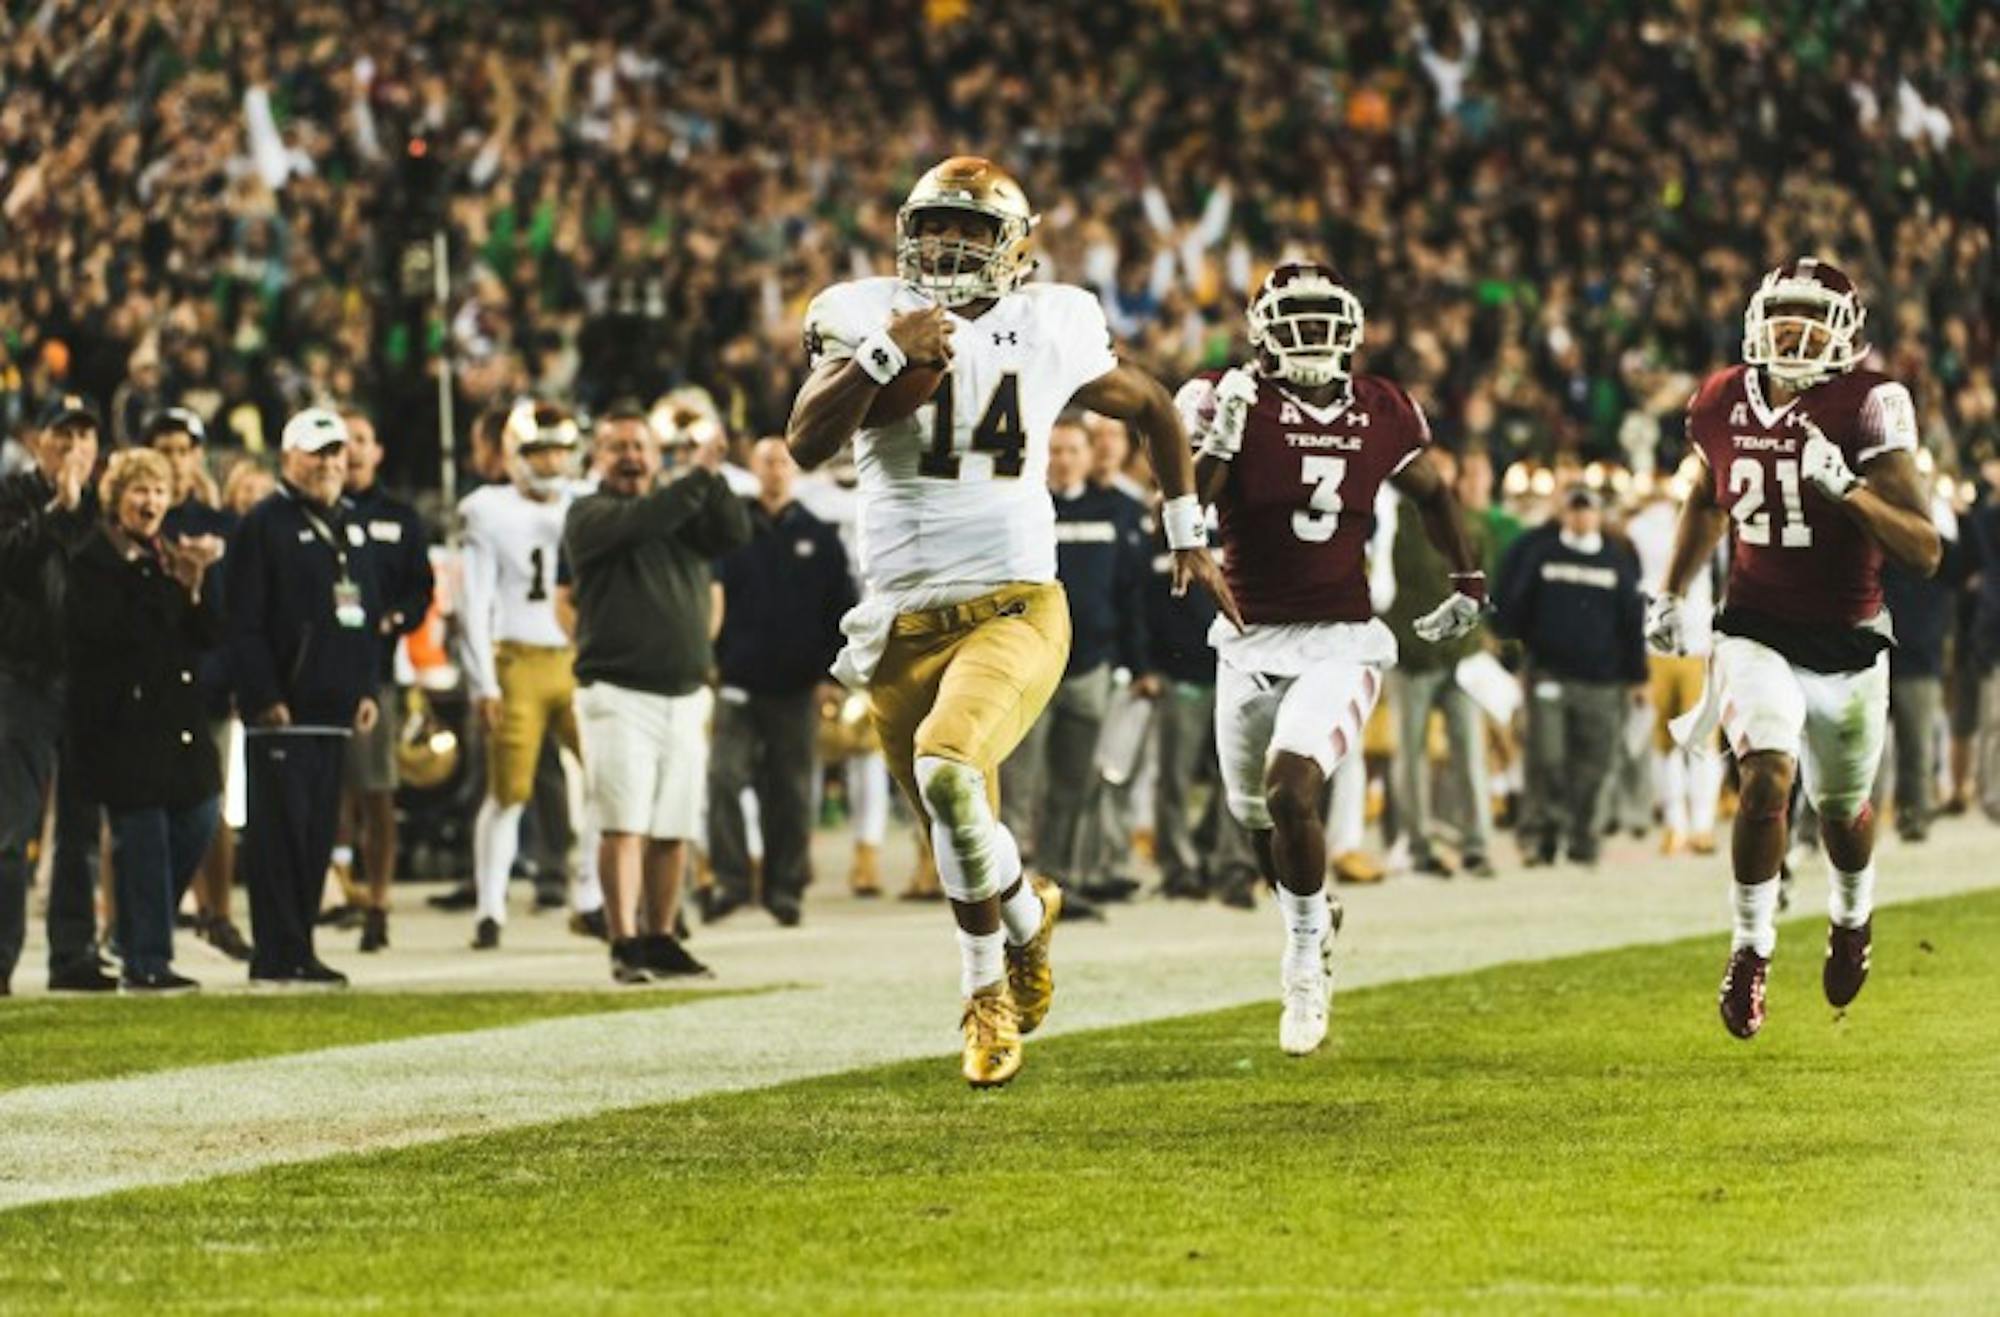 Irish sophomore quarterback DeShone Kizer runs away from the Temple defense on his 79-yard touchdown run in the second quarter of Notre Dame’s 24-20 win against Temple on Saturday in Philadelphia. Kizer became the second Irish quarterback to throw for 200 yards and rush for 100 in a single game in his three-touchdown performance.